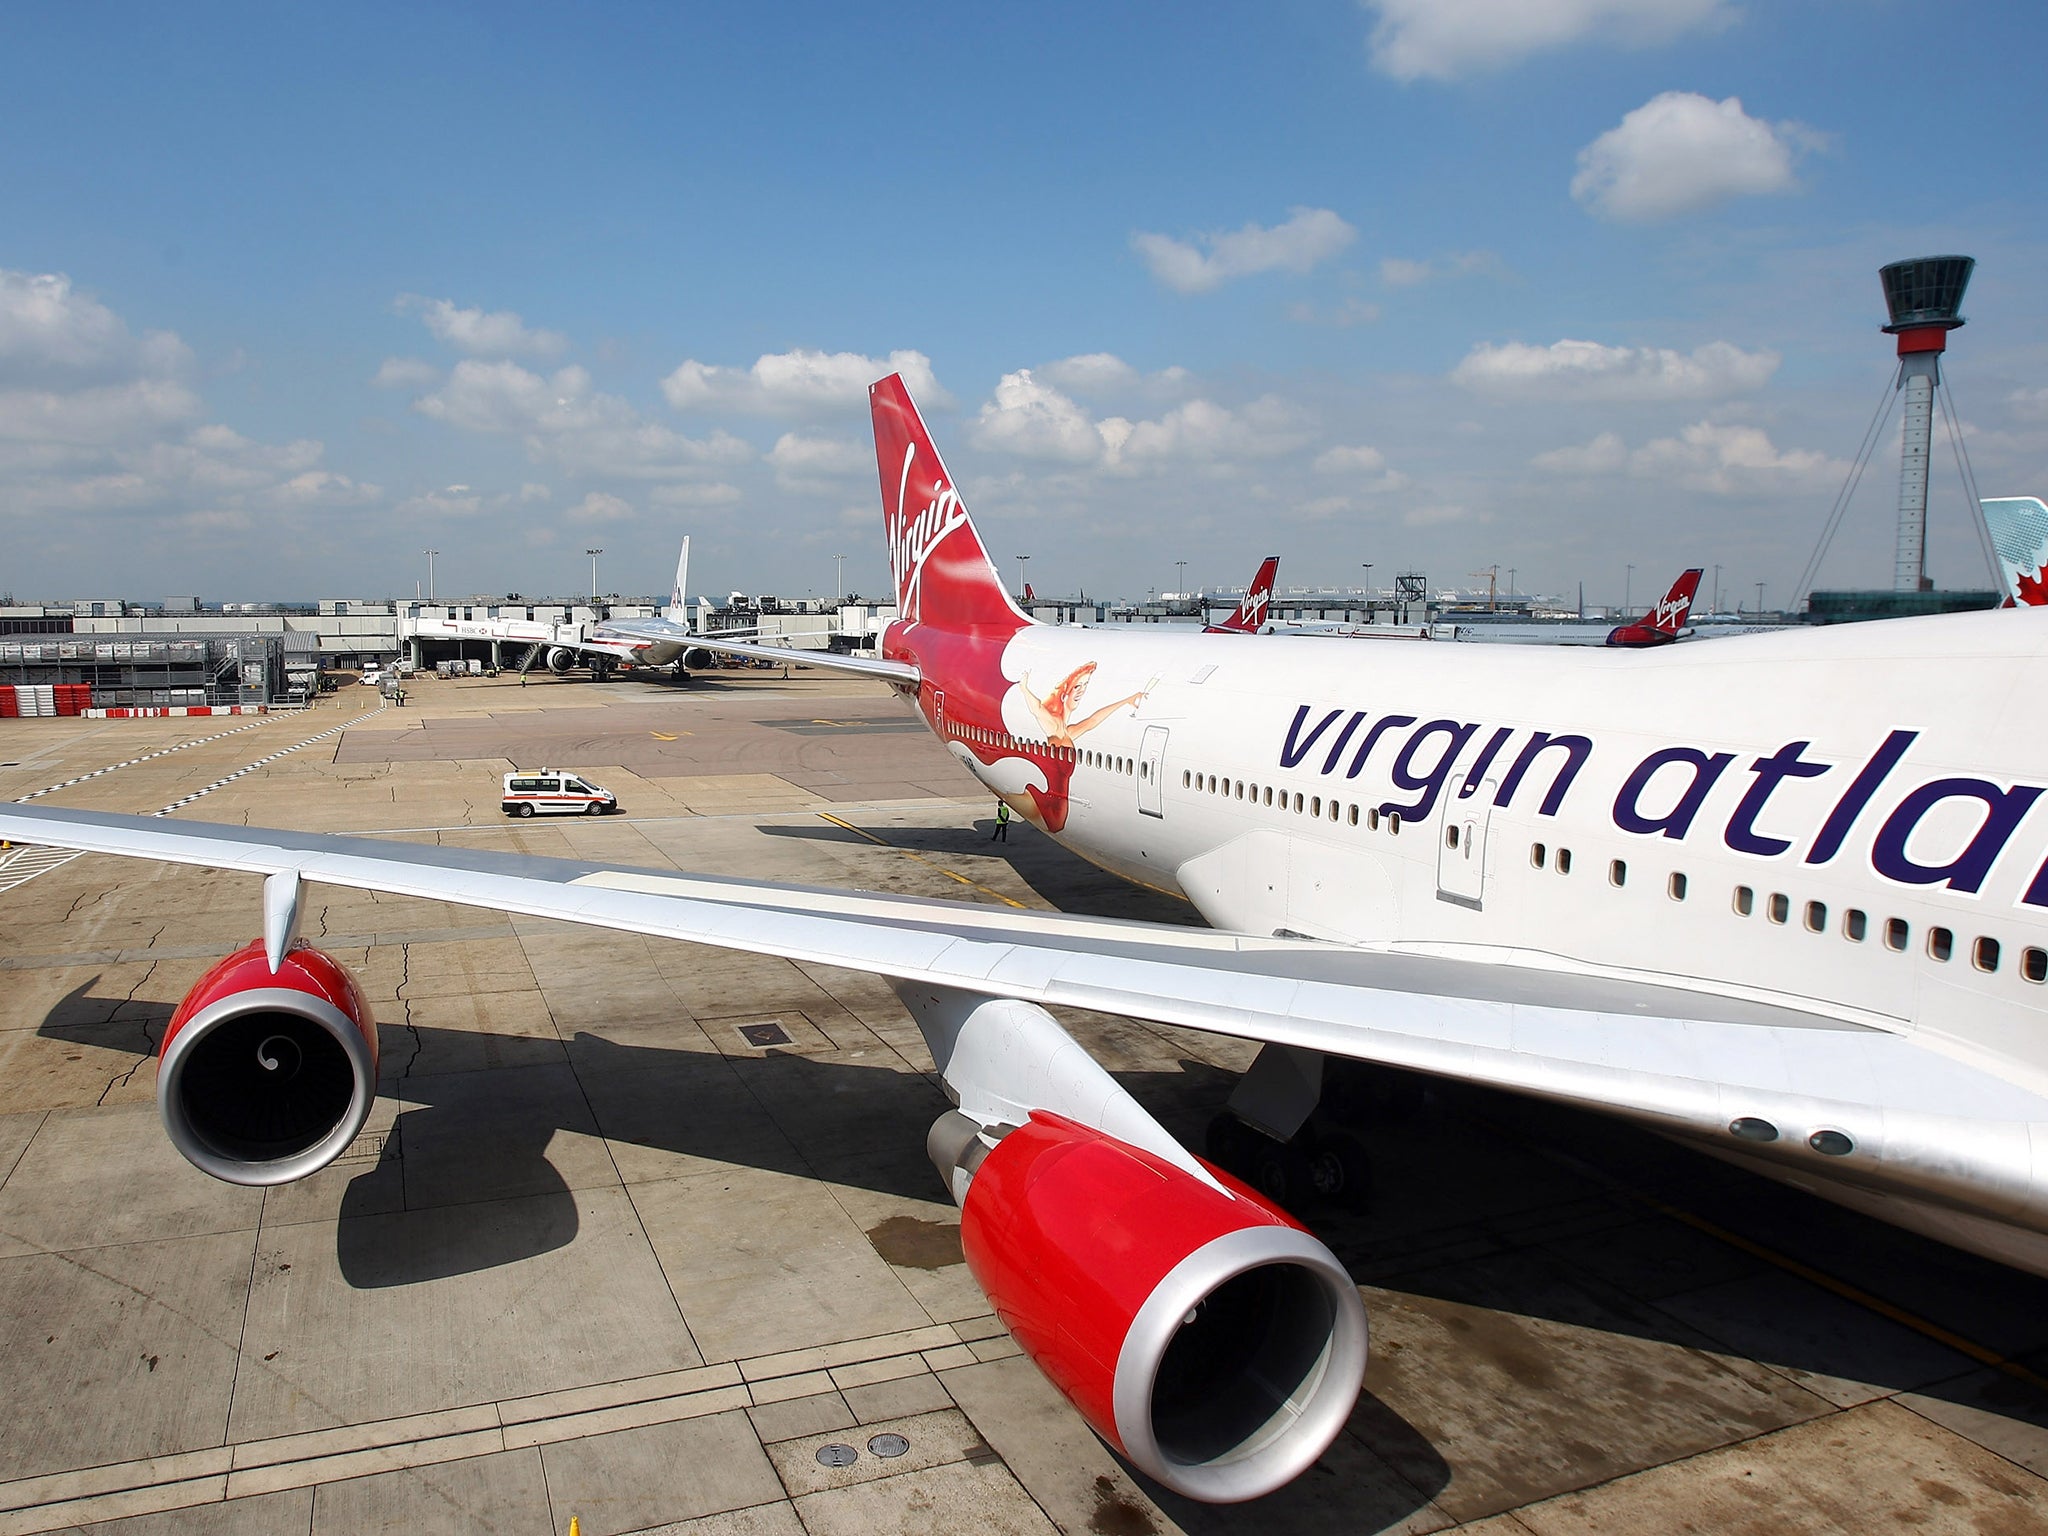 The airlines serving Hong Kong from the UK, such as Virgin Atlantic, are not at risk of collapse